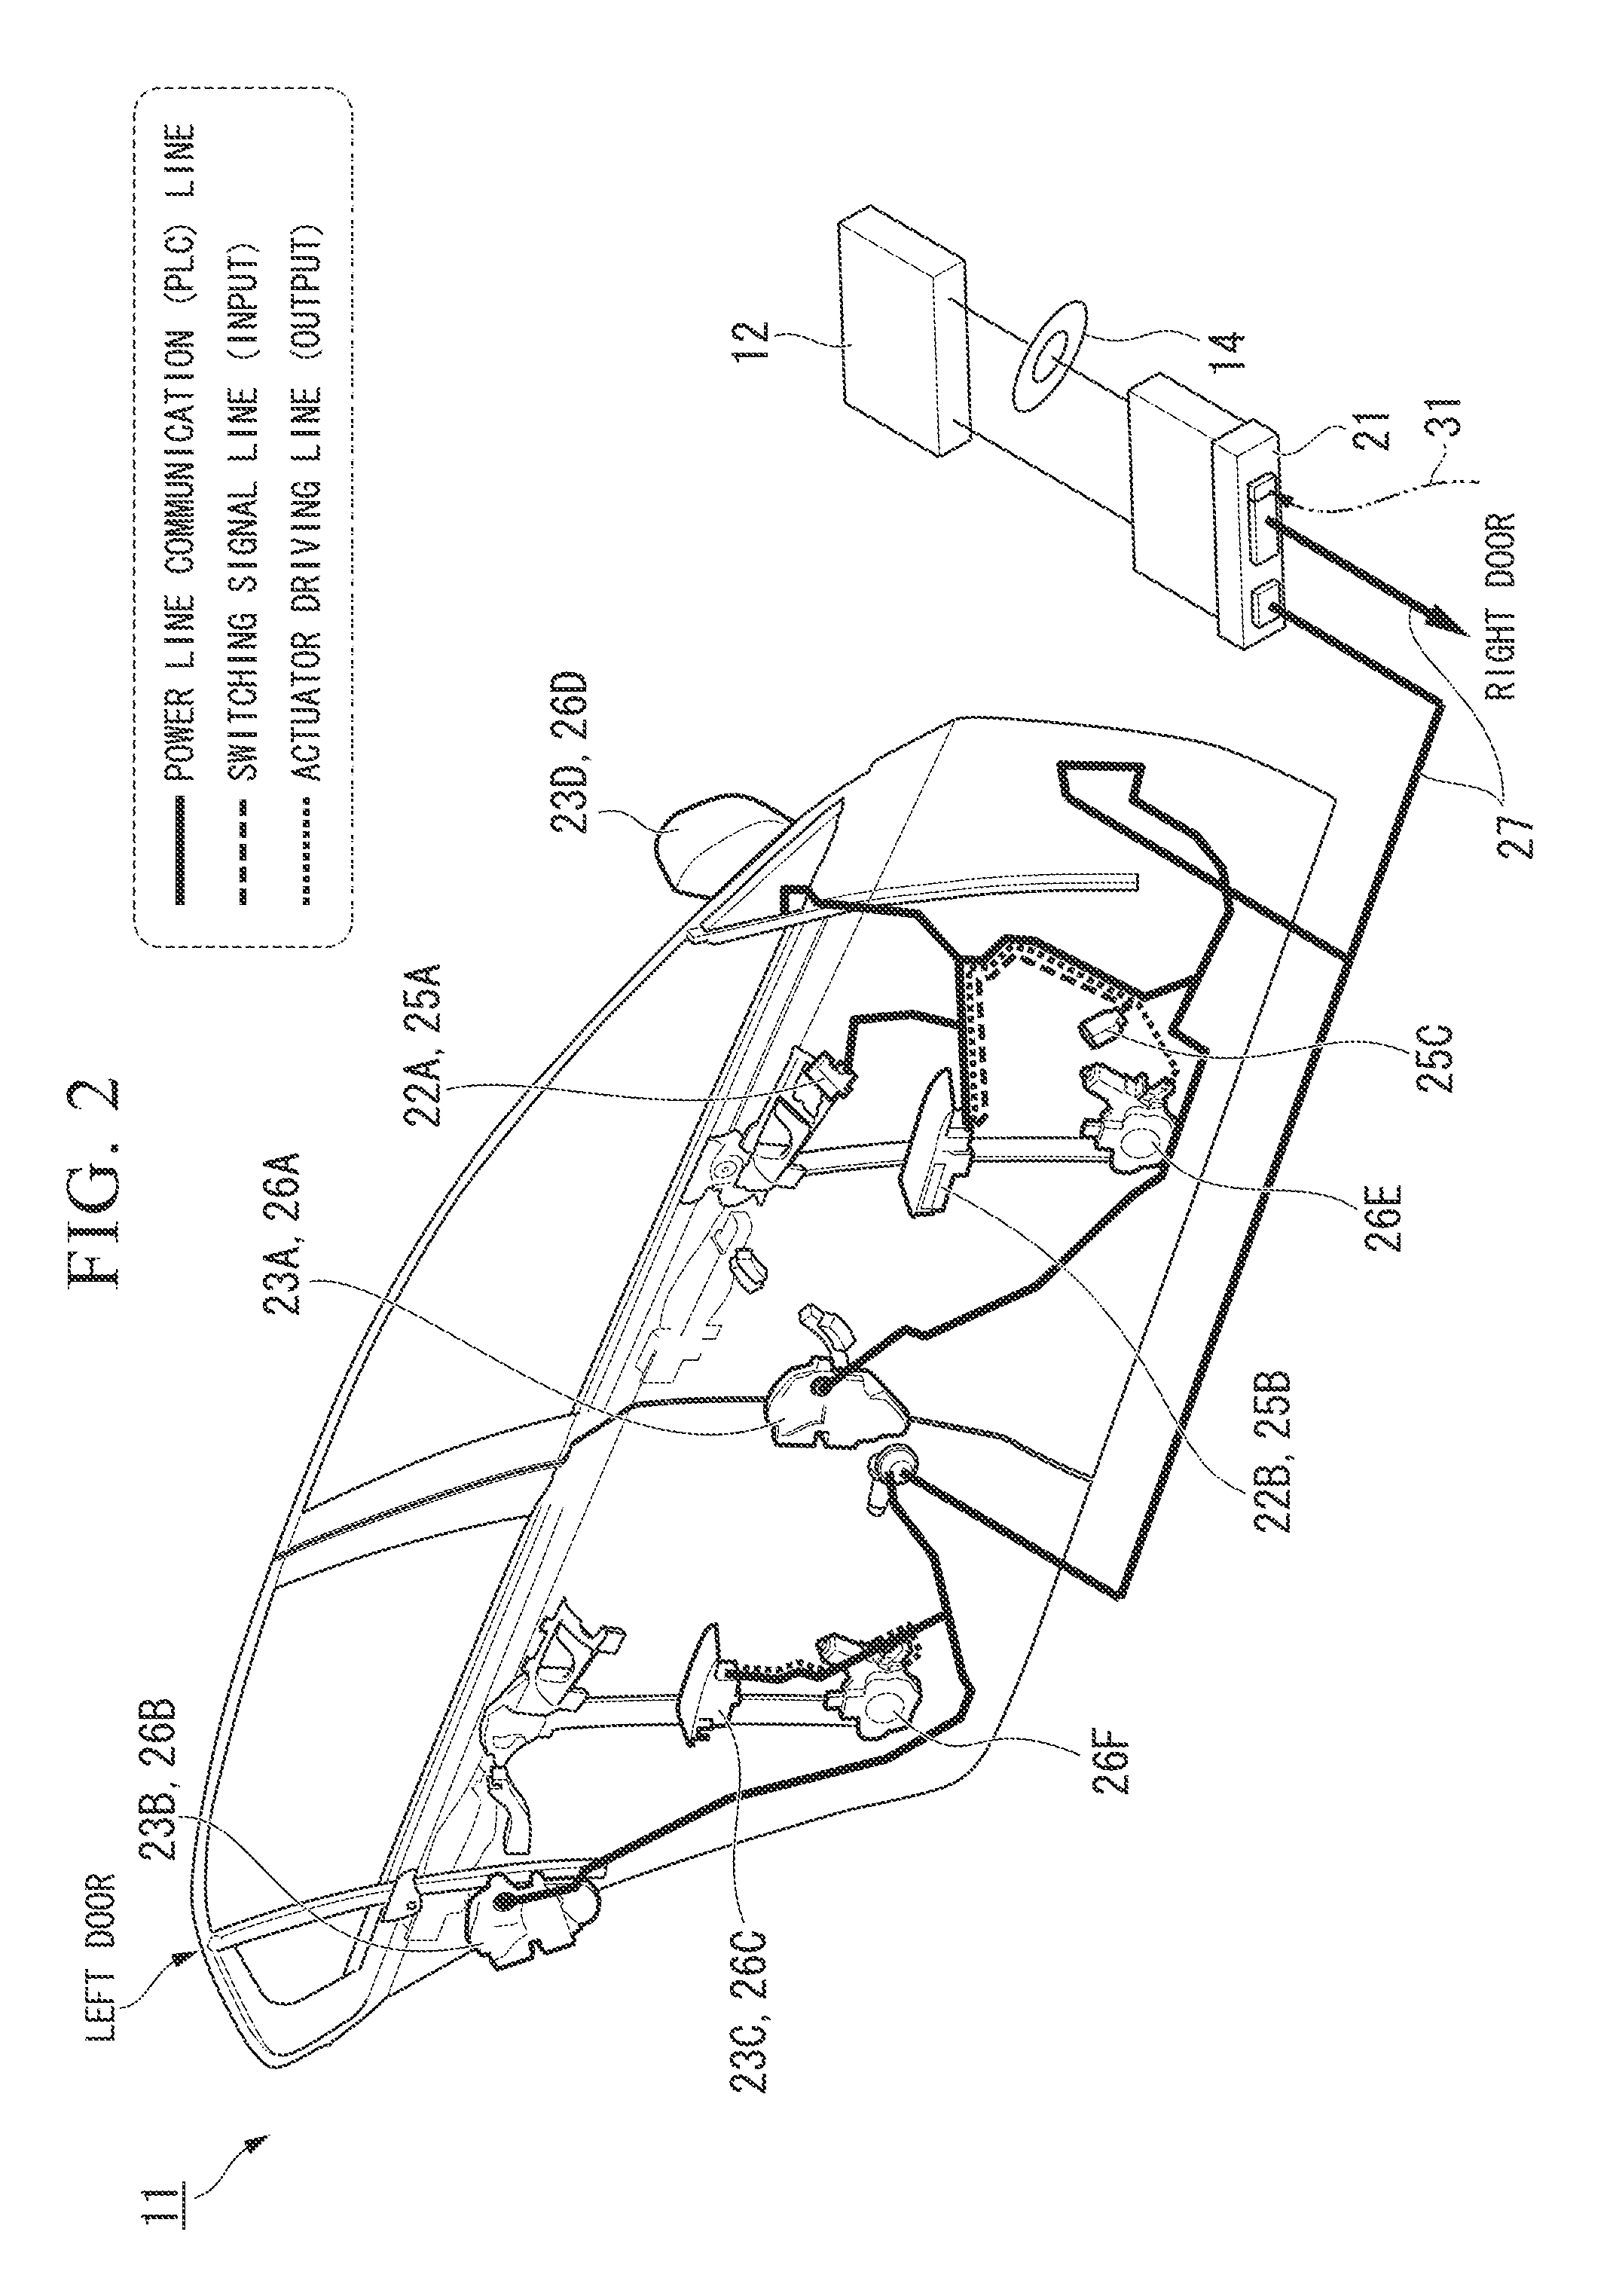 In-vehicle power line communication system